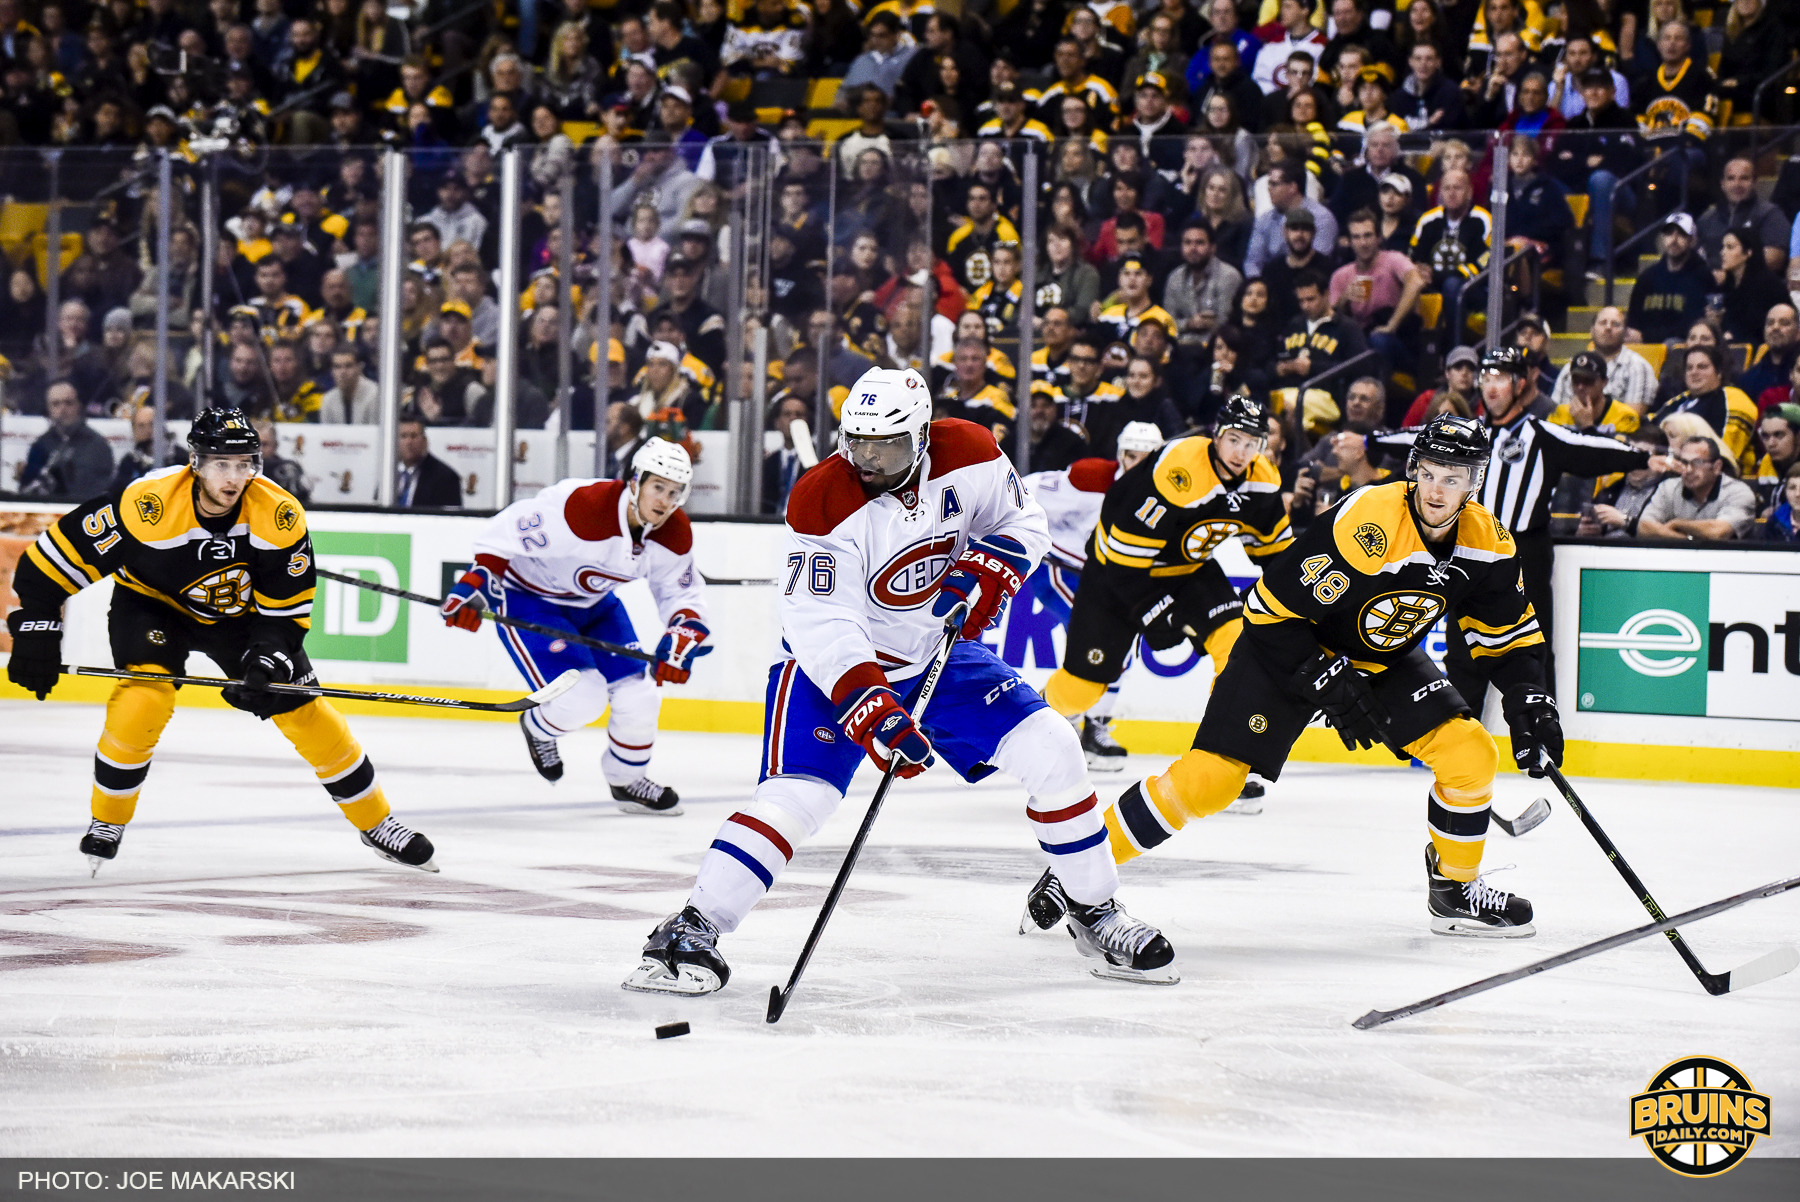 P.K. Subban will be one of the main stars when Epix documents the Bruins and Canadiens road to the Winter Classic. (Photo by Joe Makarski, Bruins Daily)